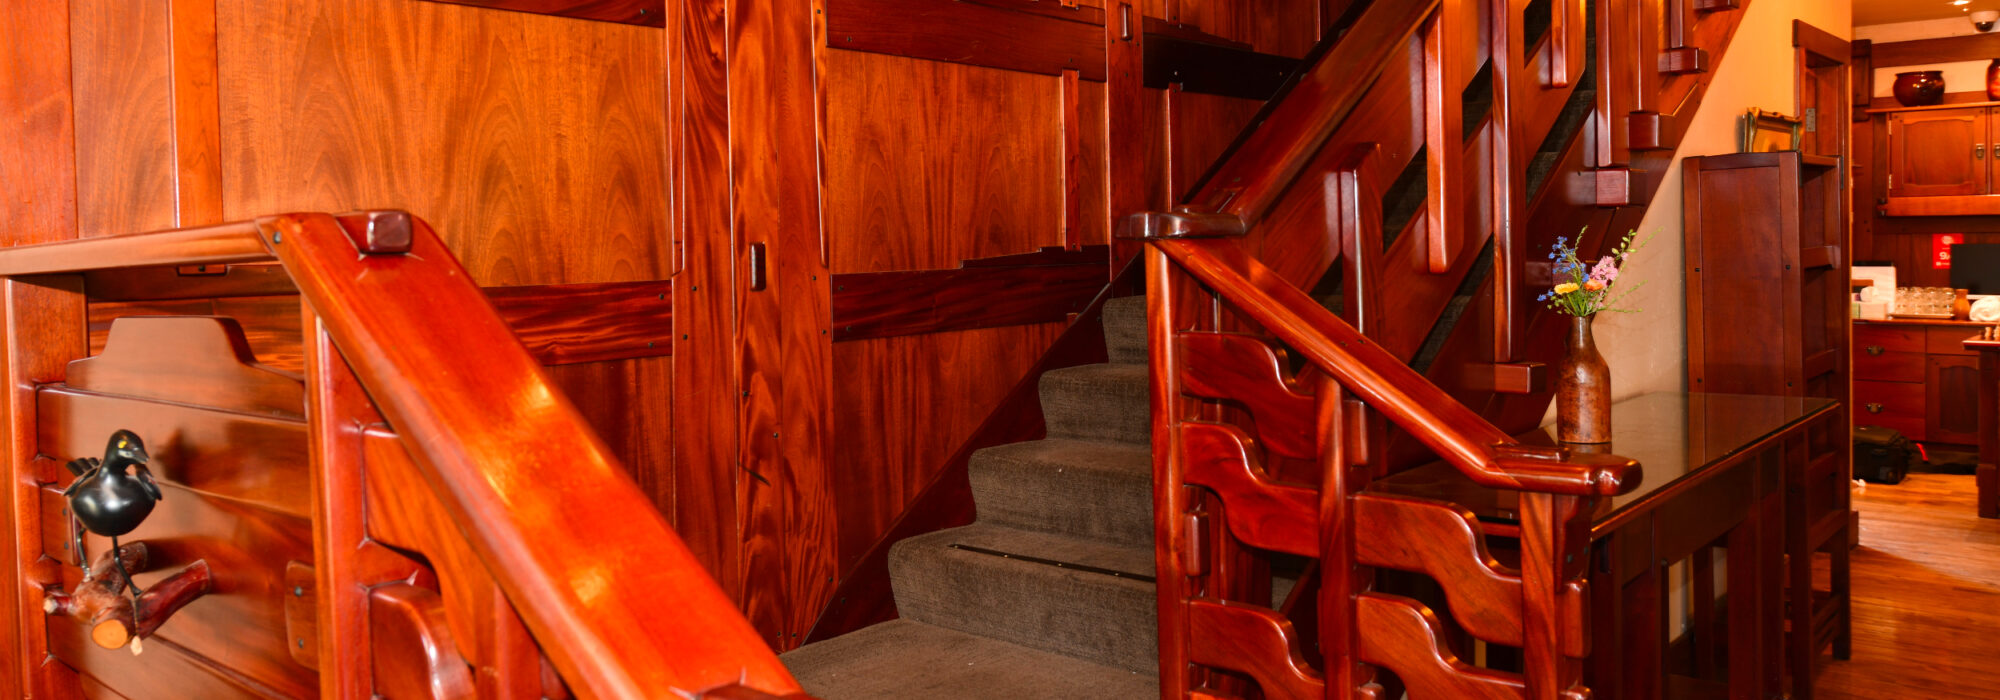 Main staircase of Blackbird Inn. Carved mahogany balustrade in wavy craftsman pattern surrounds green carpeted stairs. Back wall is mahogany paneling.